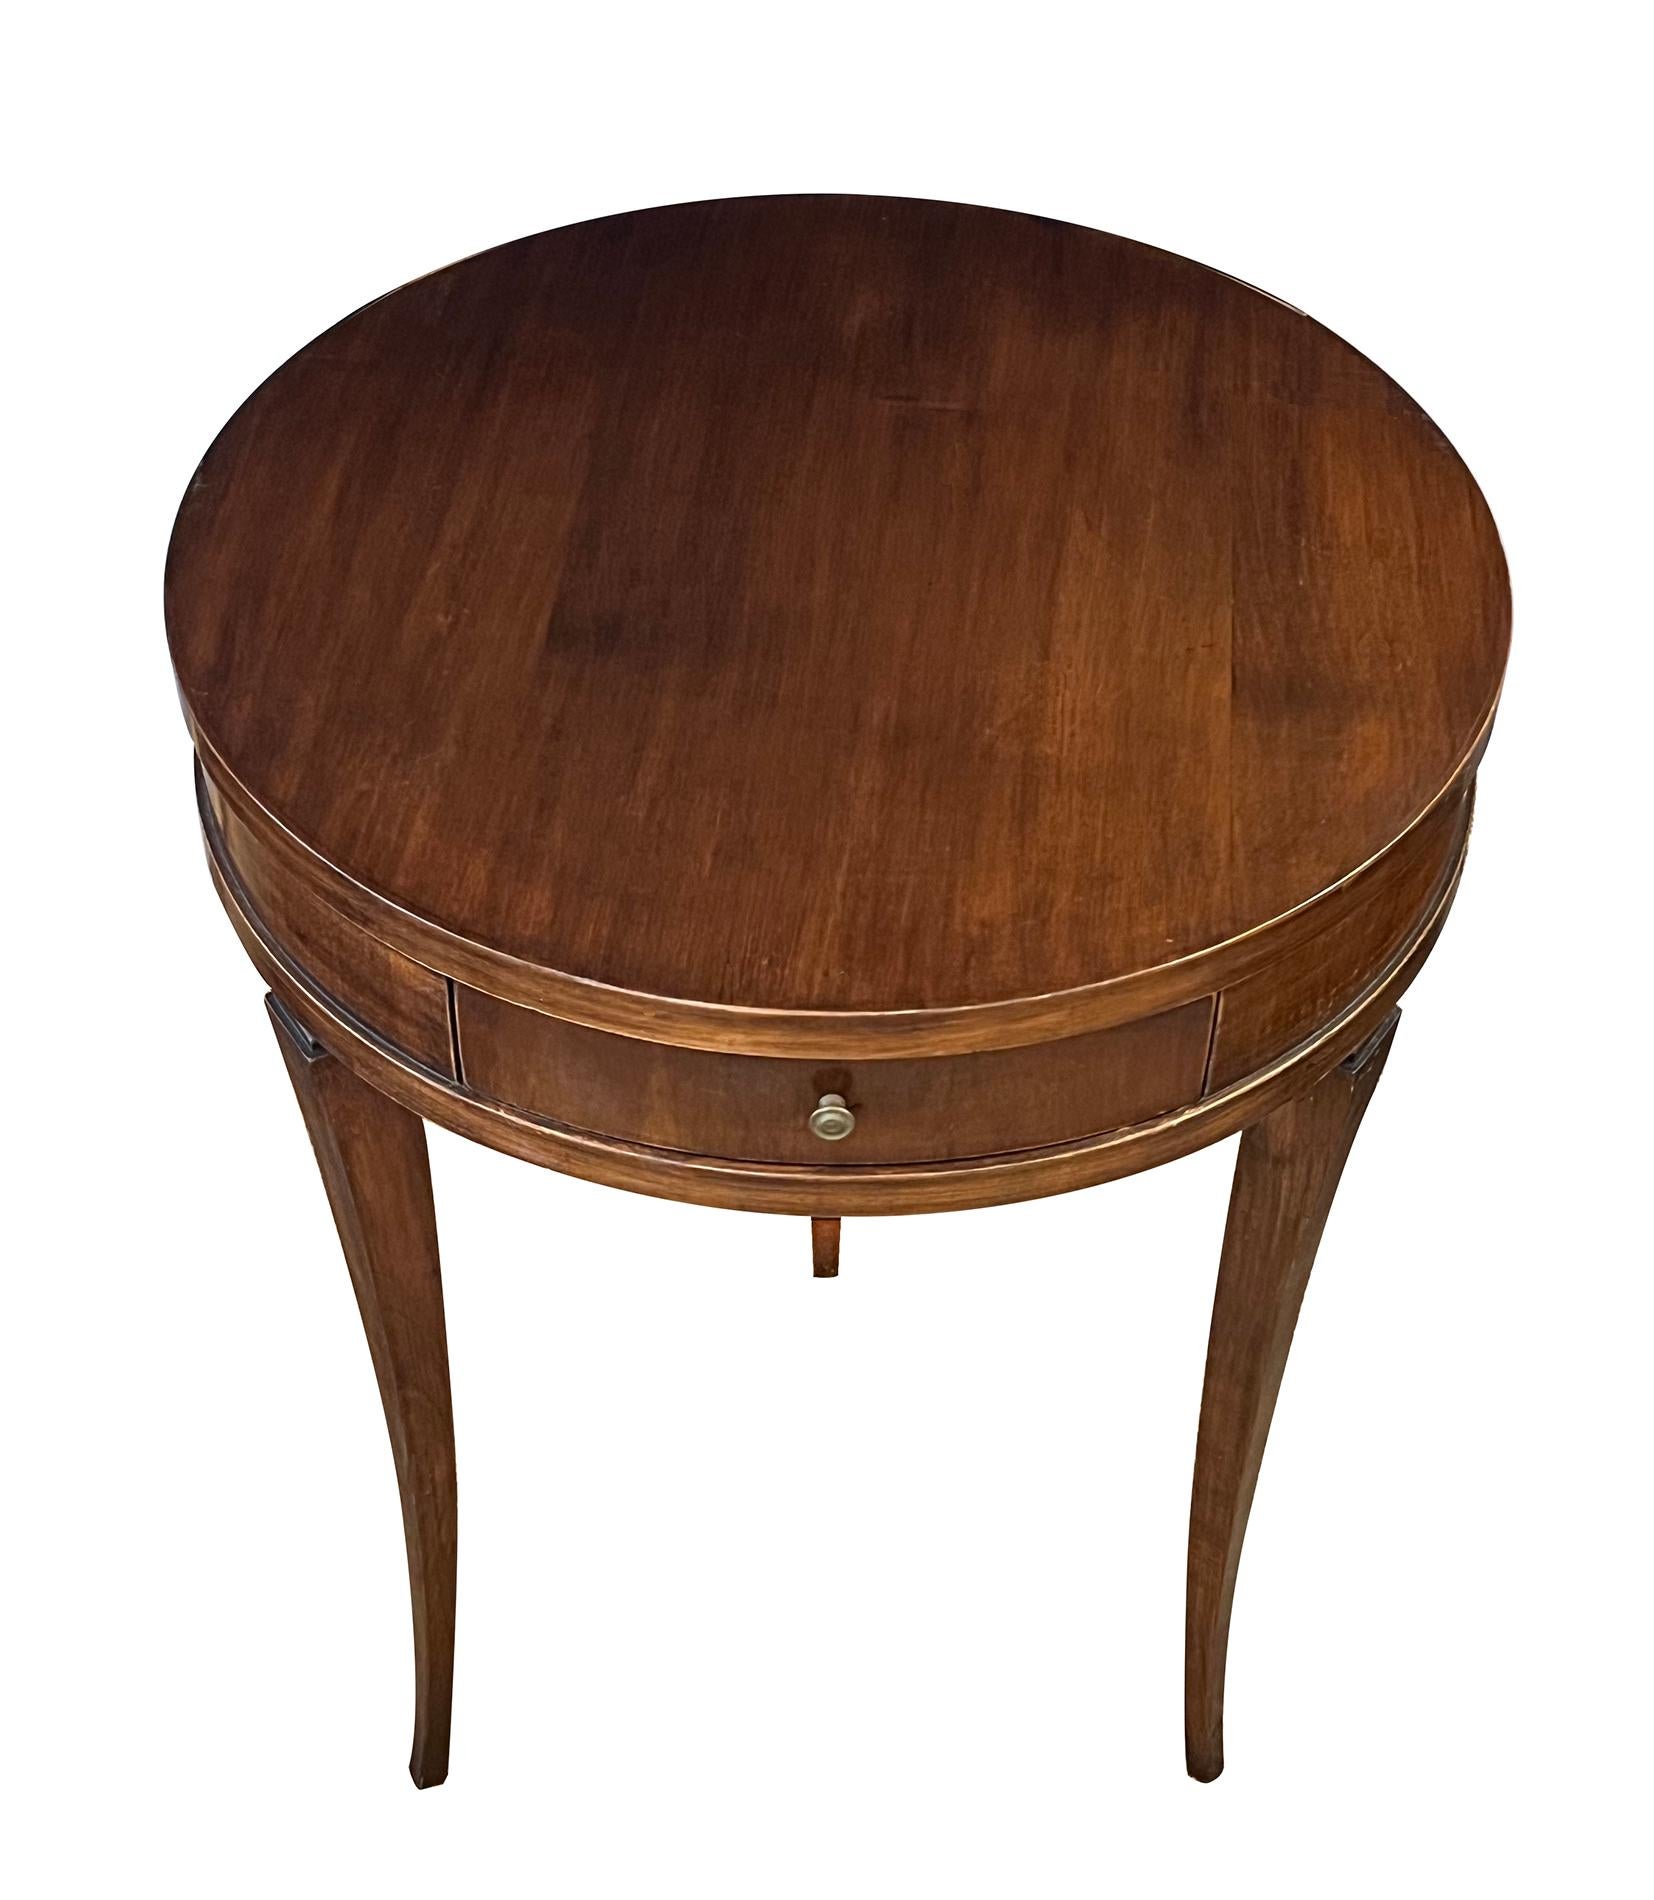 the round top above a plain frieze apron fitted with a single drawer; raised on a tripod base of elegantly splayed and tapering supports with a waisted neck